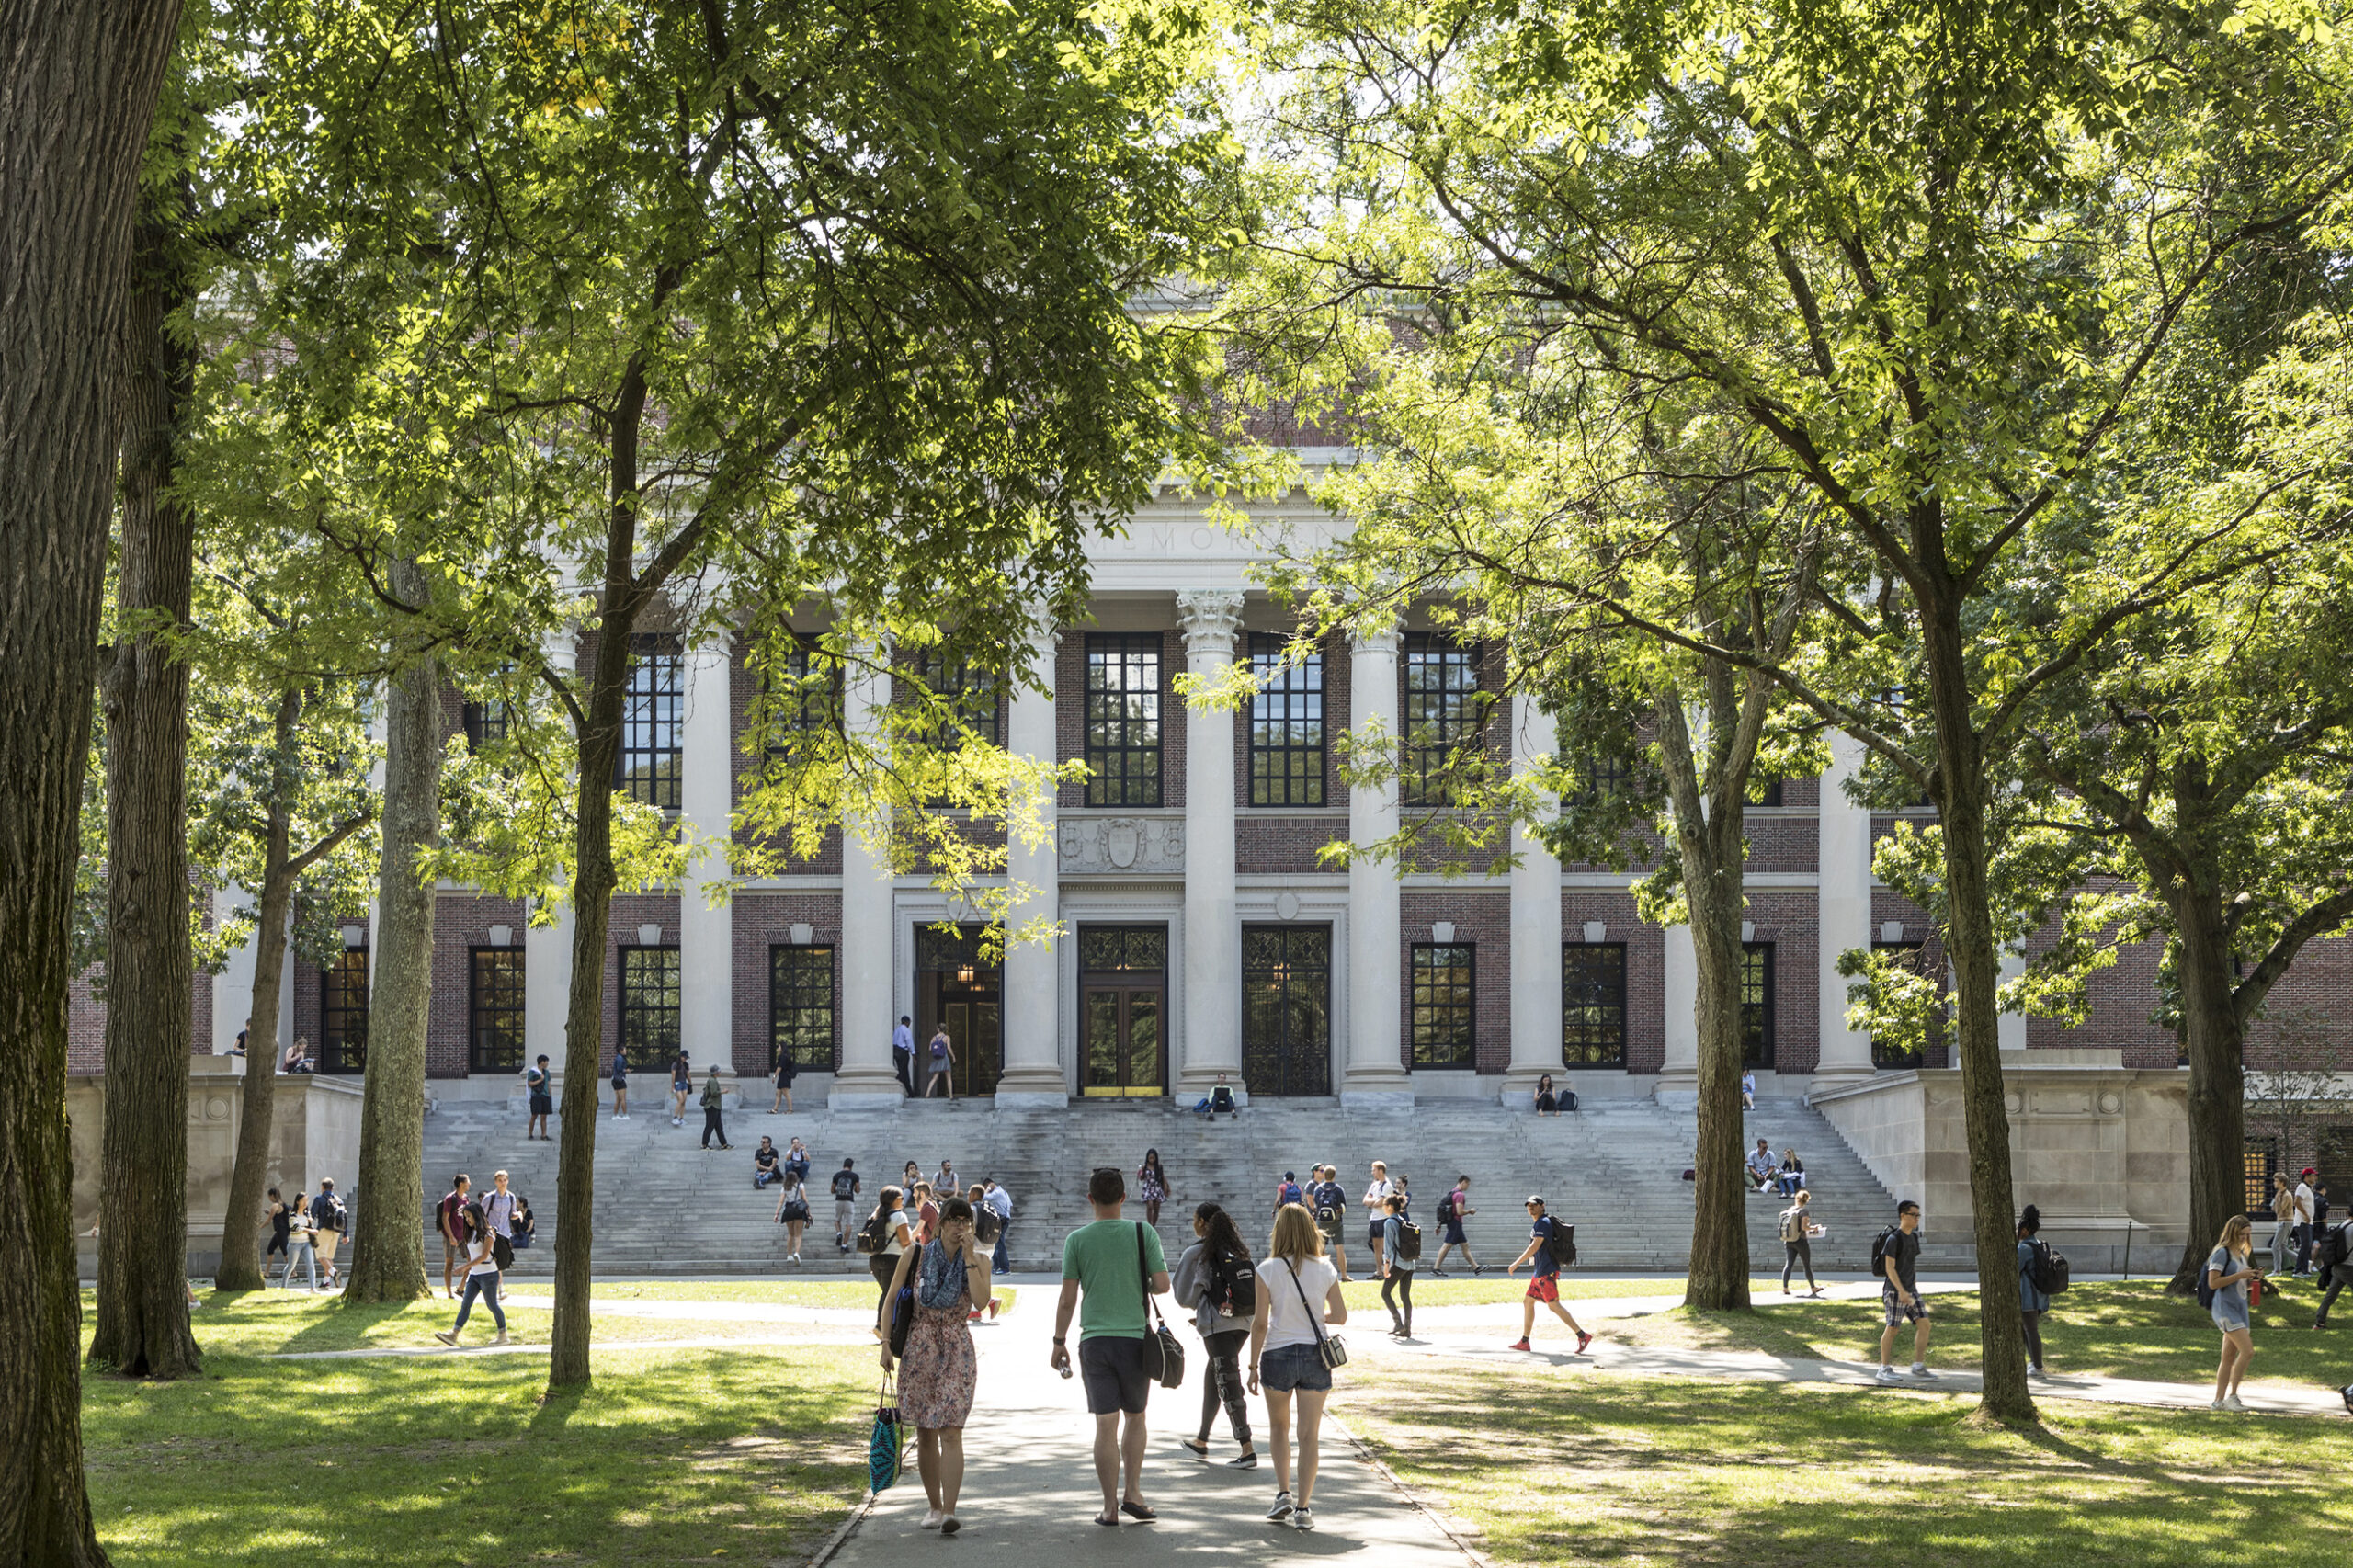 An image from the campus of Harvard University, depicting students and families walking around.